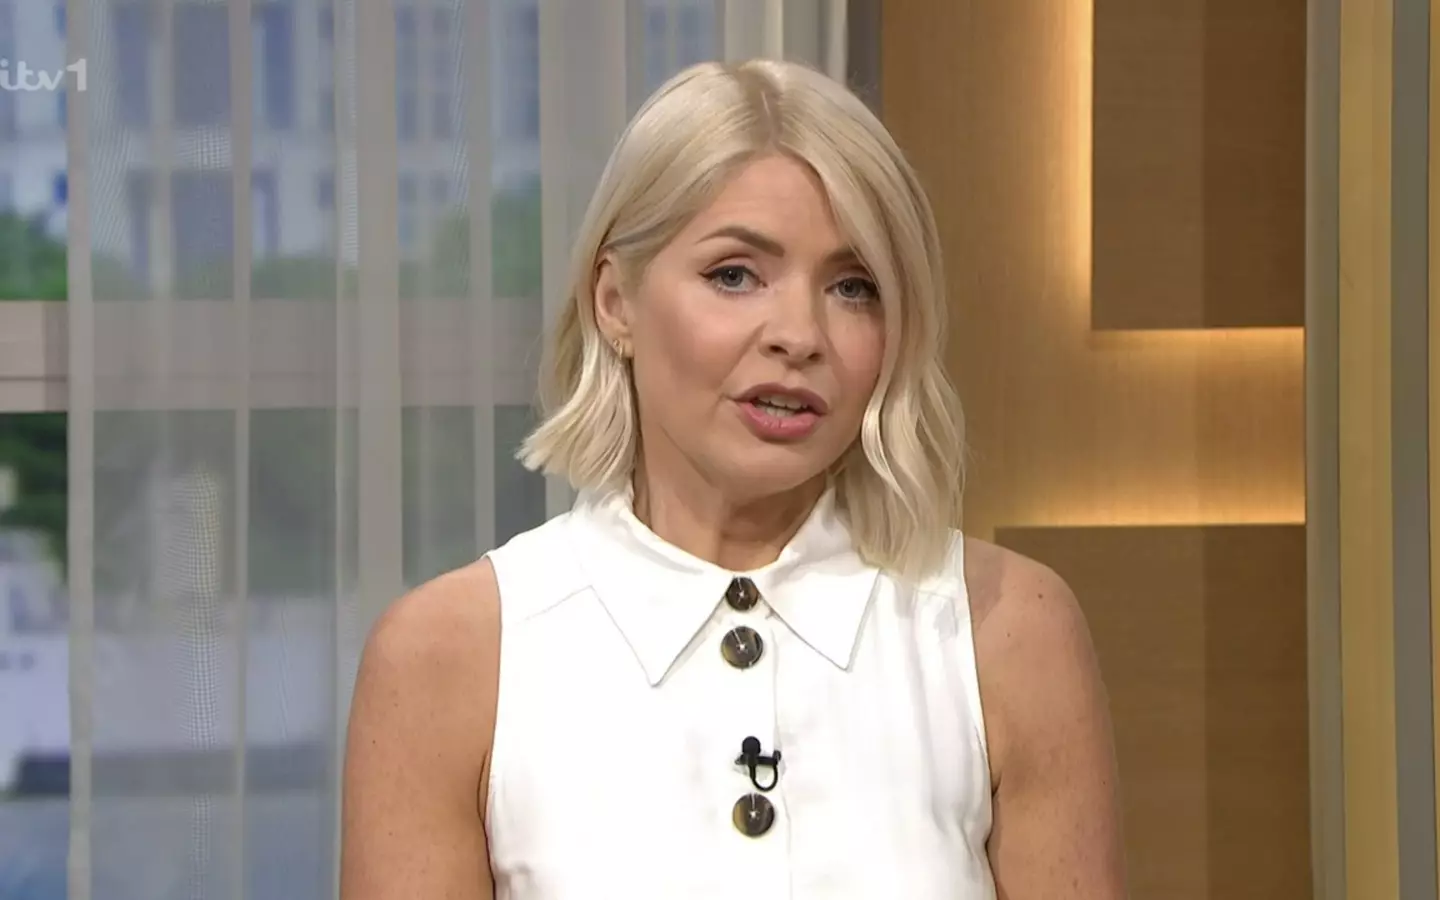 Holly Willoughby quit This Morning last week.